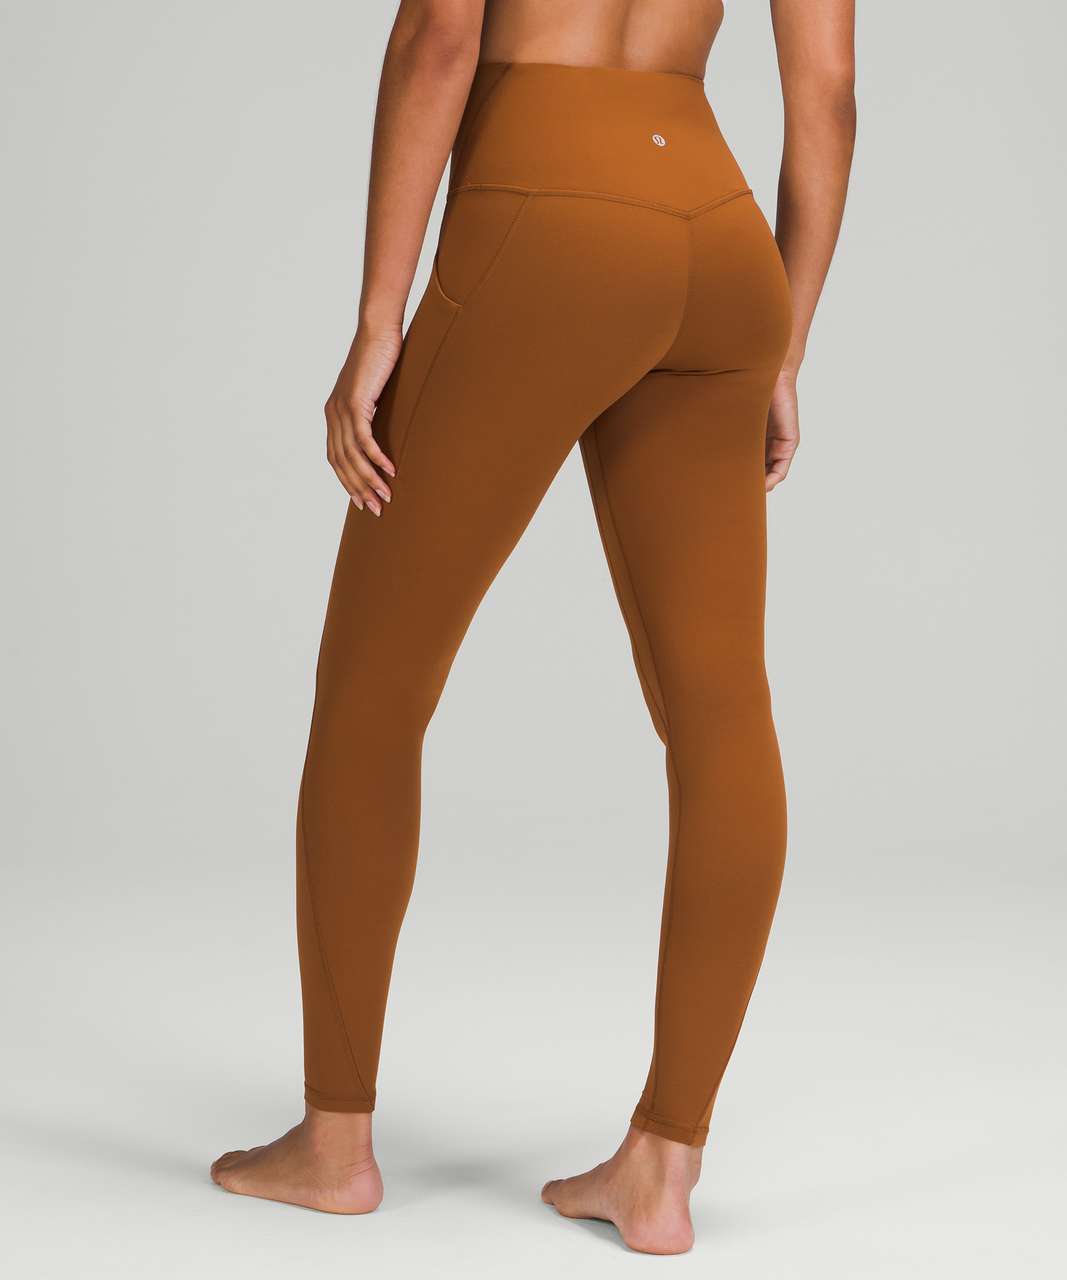 Lululemon Align High-Rise Pant with Pockets 28" - Copper Brown